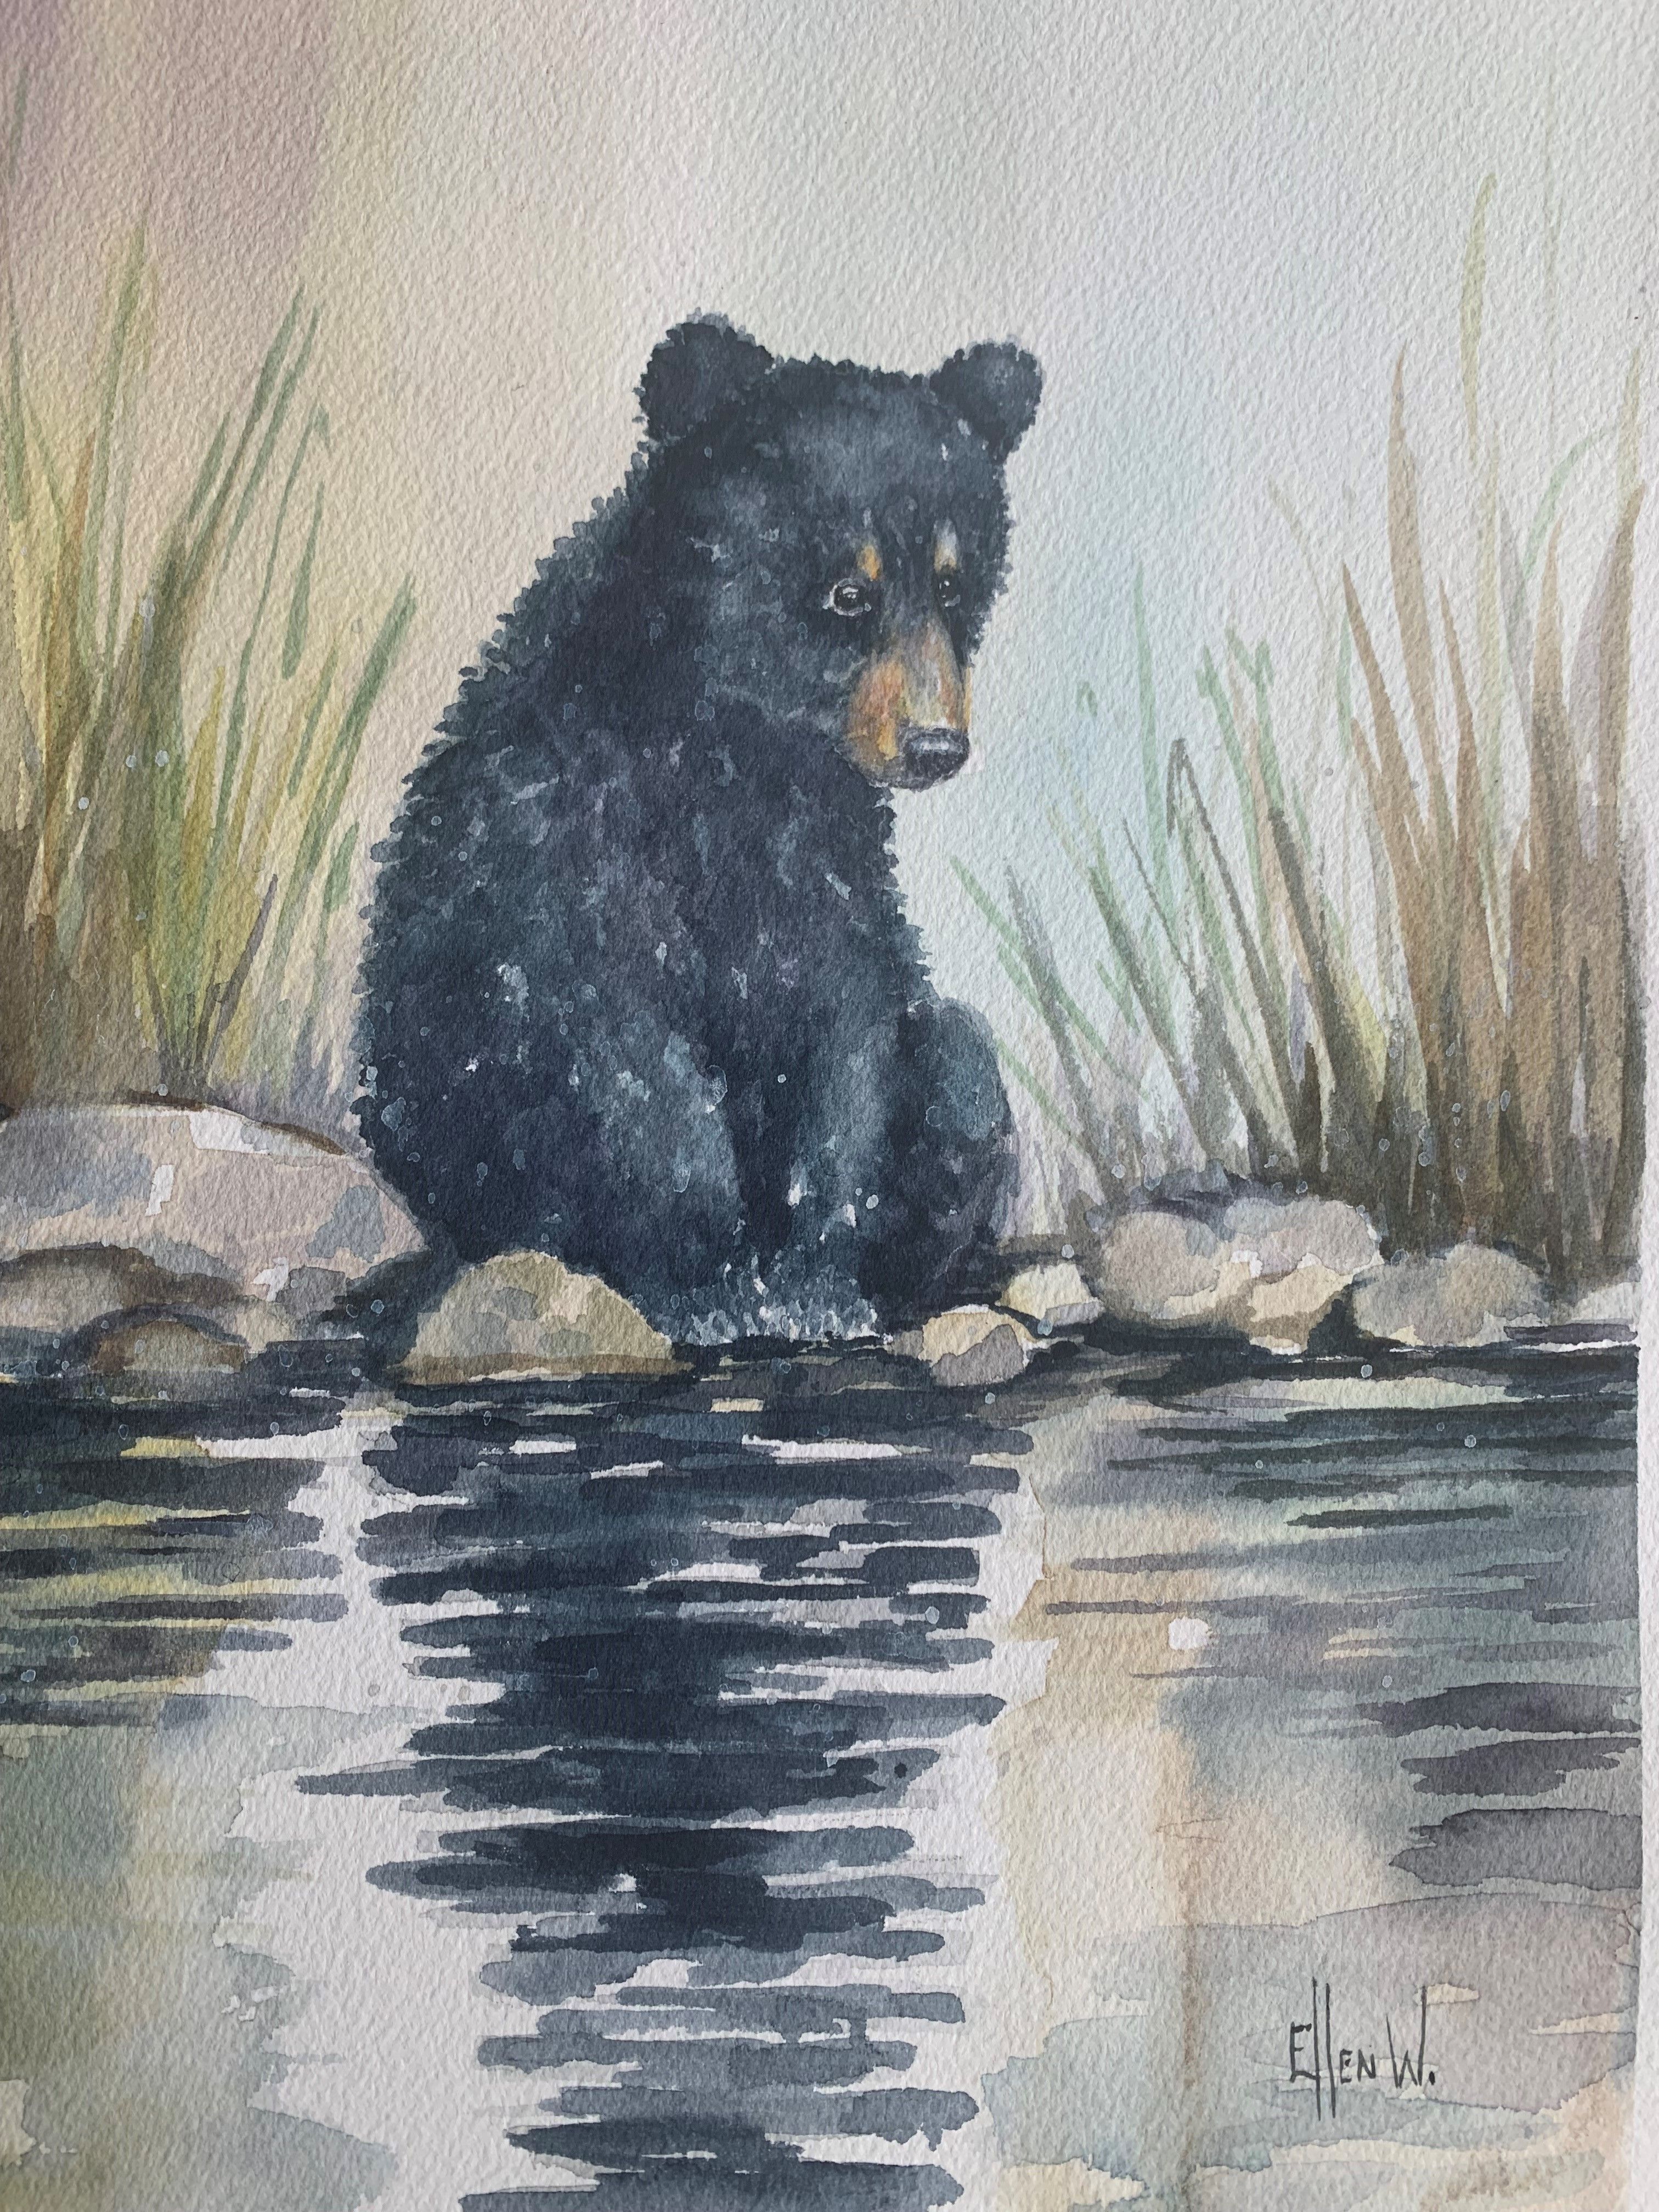 Bear cub staring at its reflection is a pond. It is sitting among some small stones with aquatic grasses or rushes in the background.